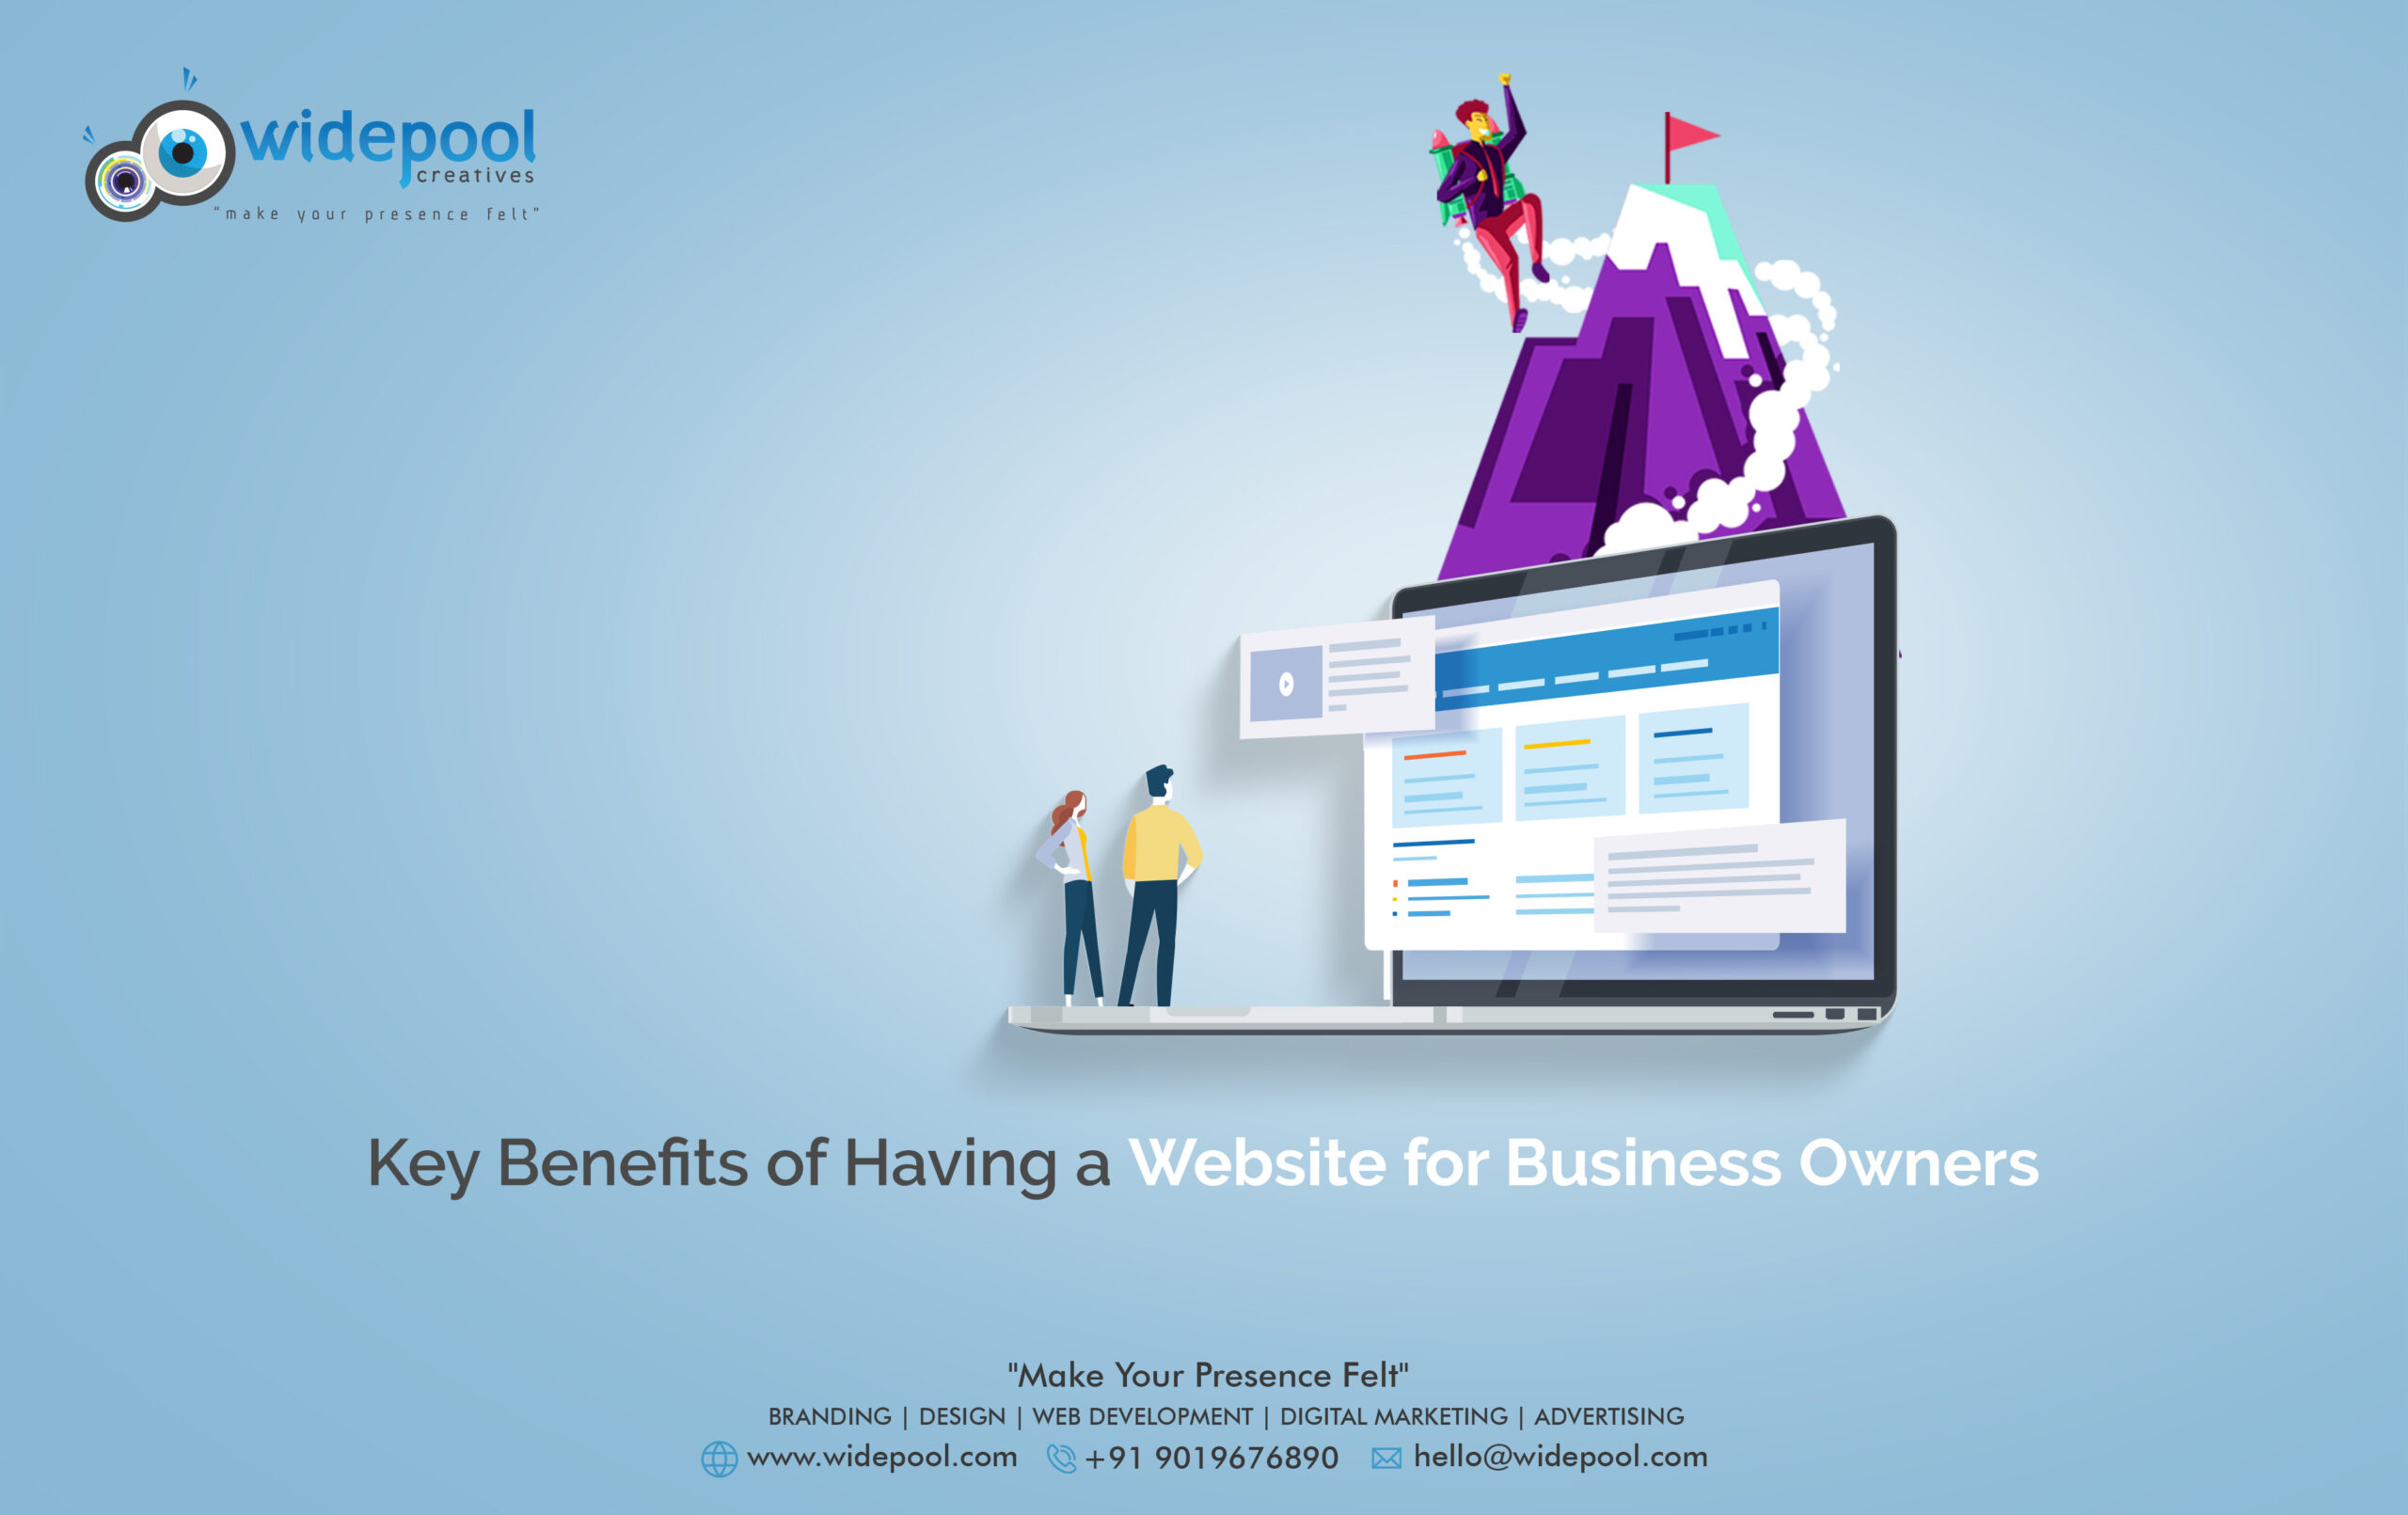 Key Benefits of Having a Website for Business Owners